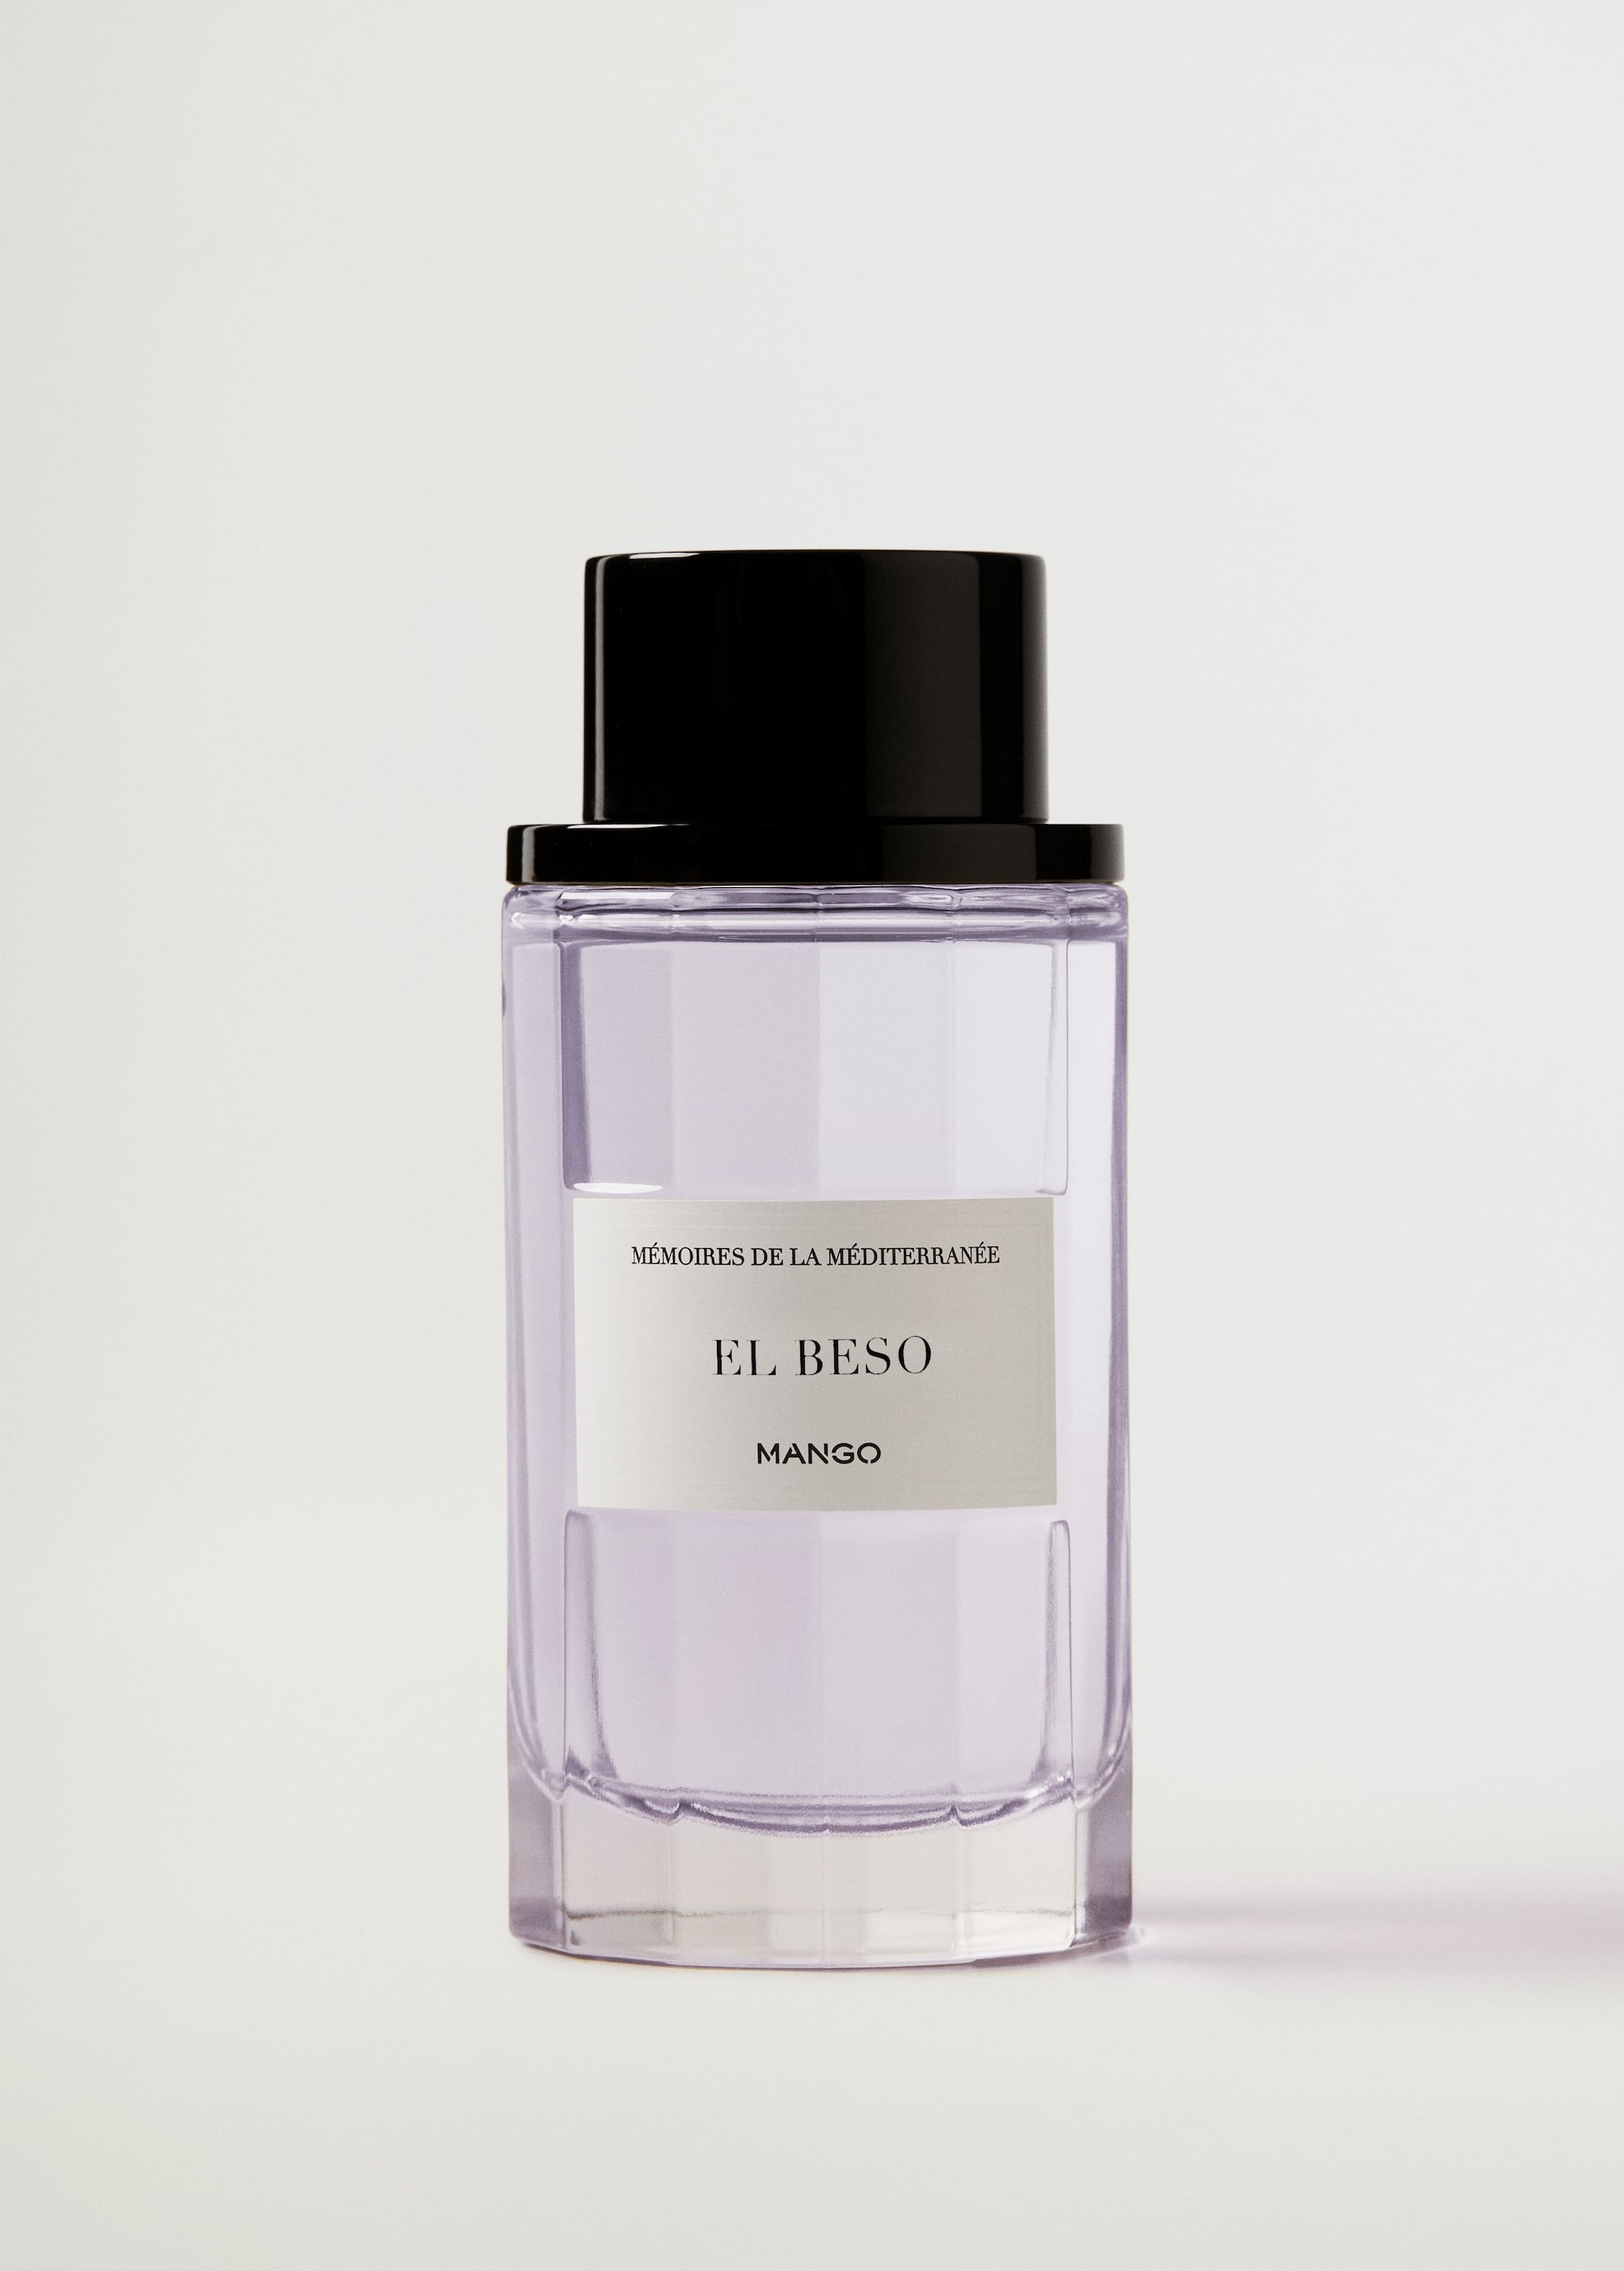 El Beso fragrance 100 ml - Article without model